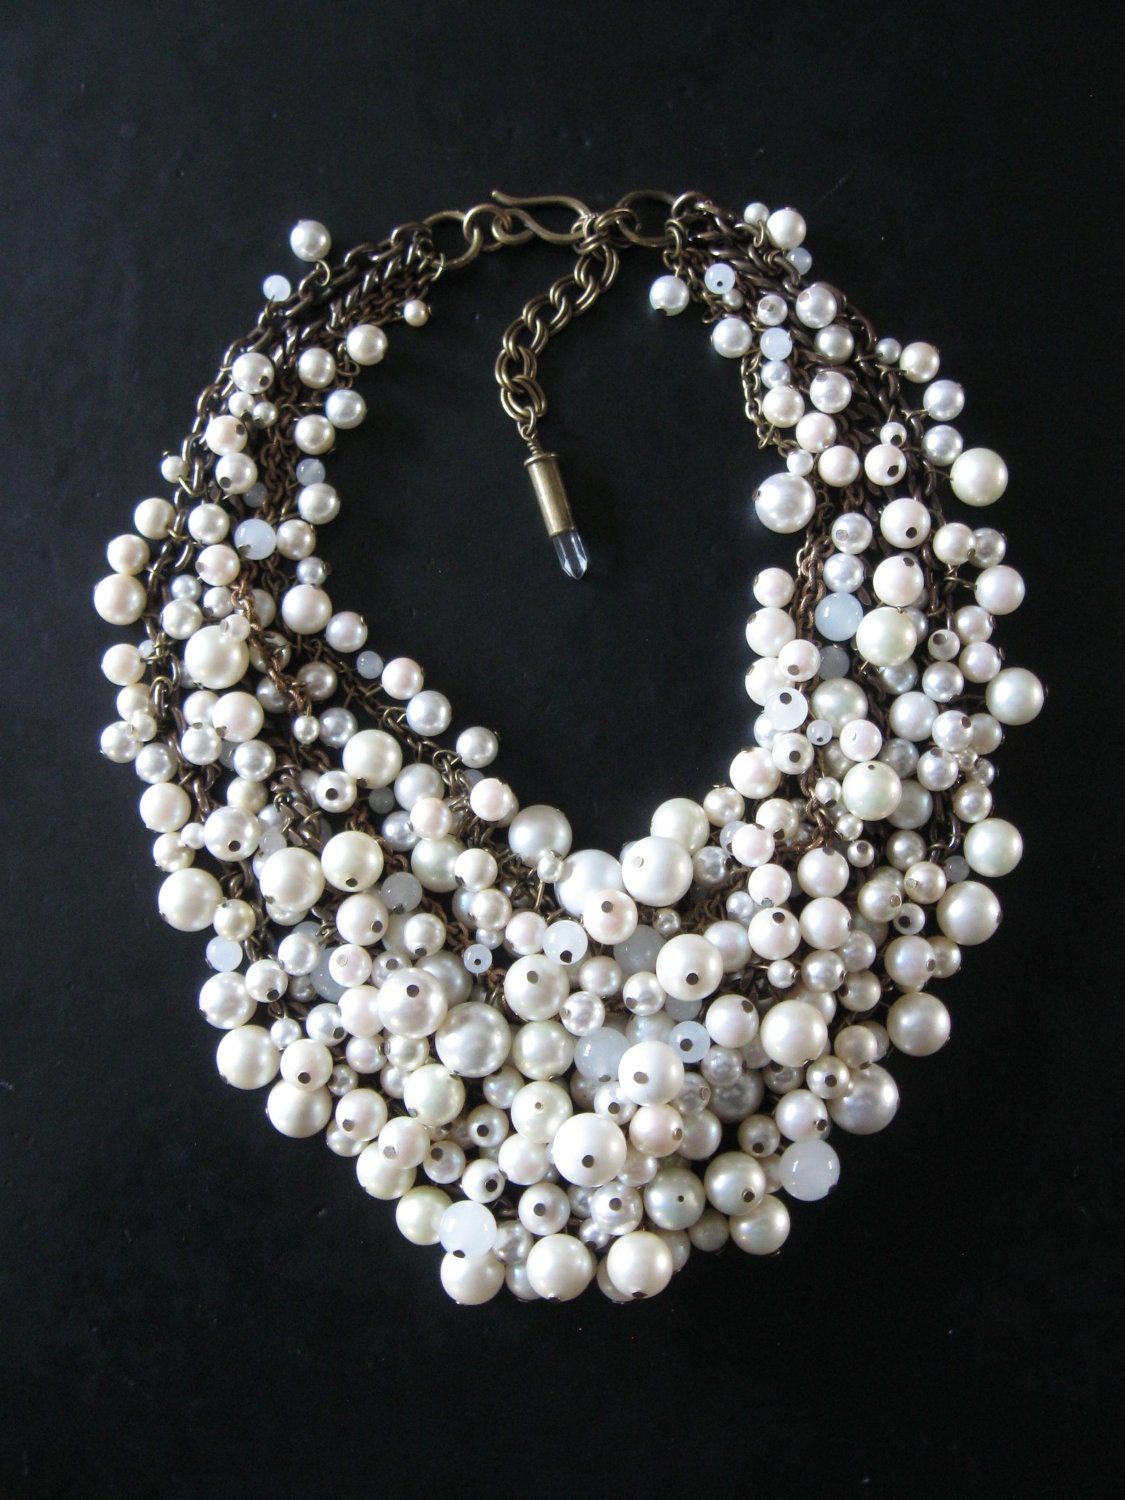 Pearl Statement Necklace - Mermaid Farts - Creamy White and Brass Recycled Faux Pearl Bib - Eco Friendly